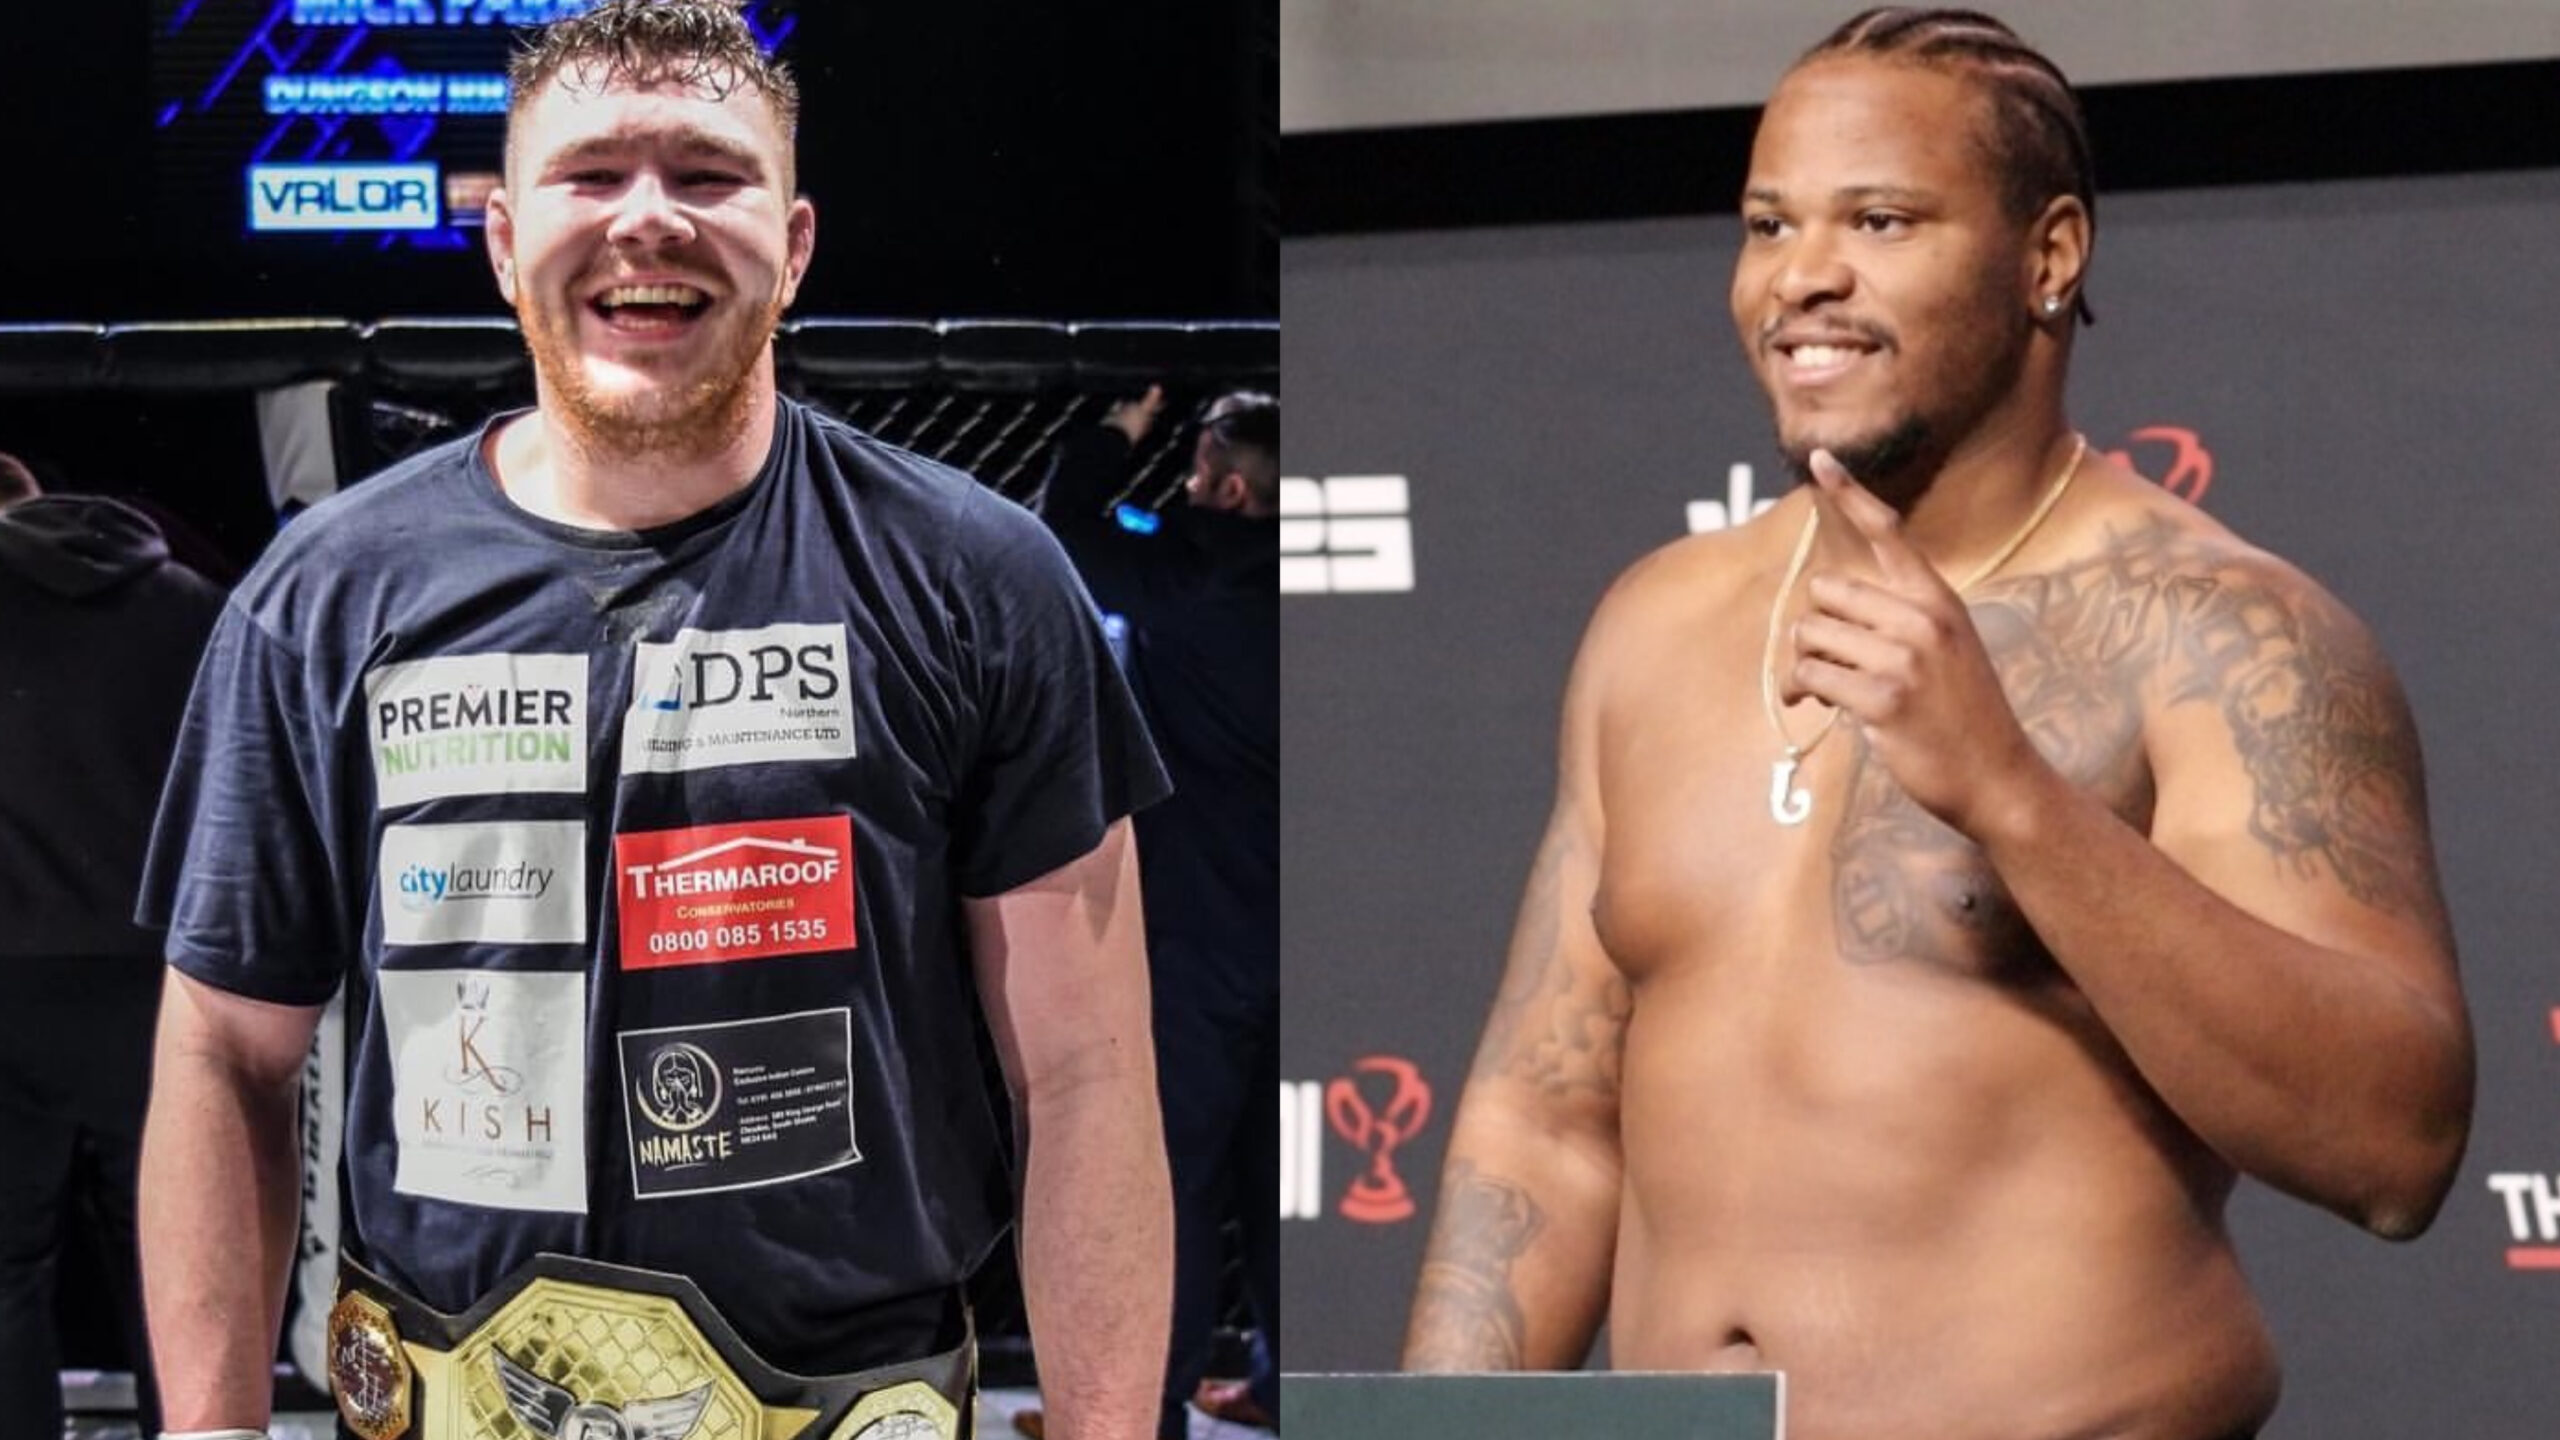 UFC London Mick Parkin slated against Jamal Pogues in heavyweight bout